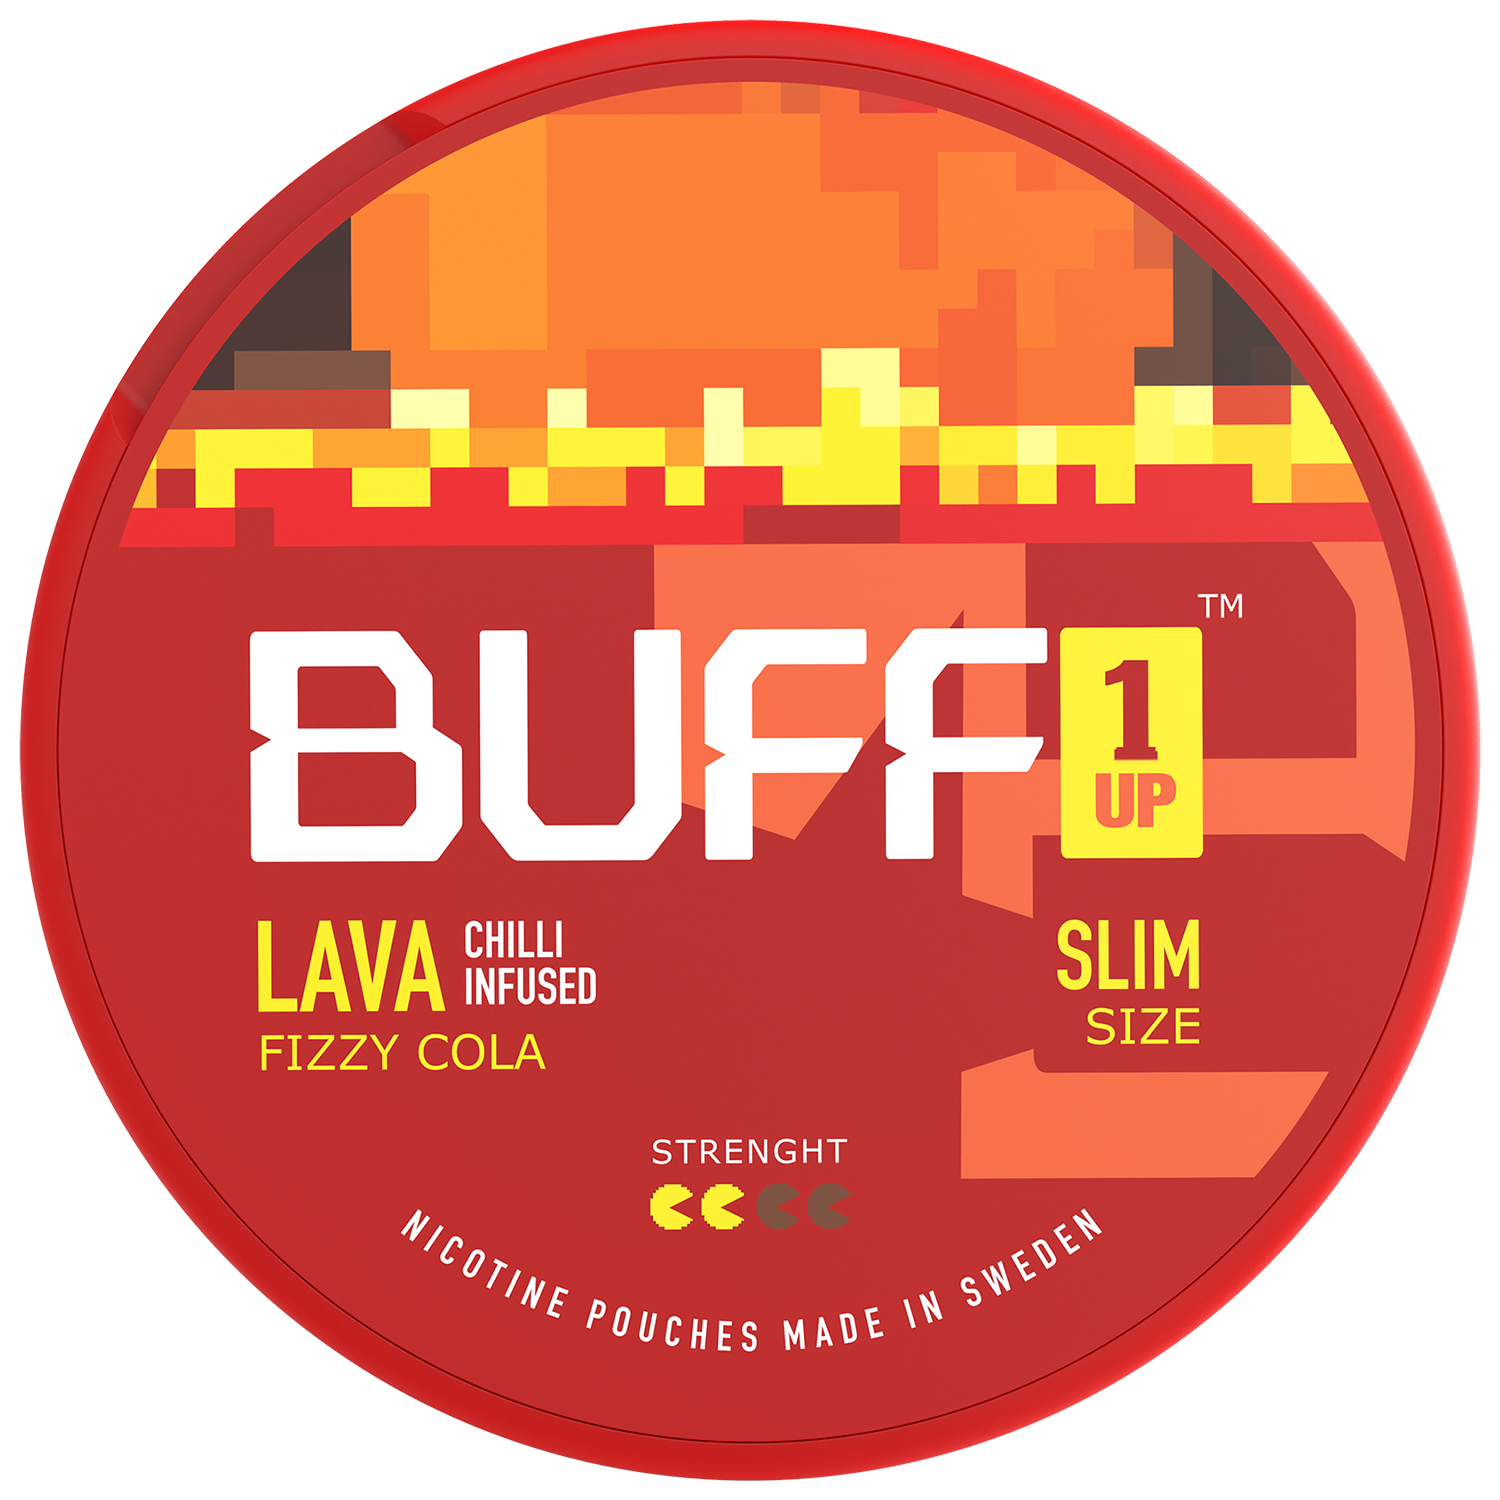 Buff-1Up-Lava-Chilli-Infused-Fizzy-Cola